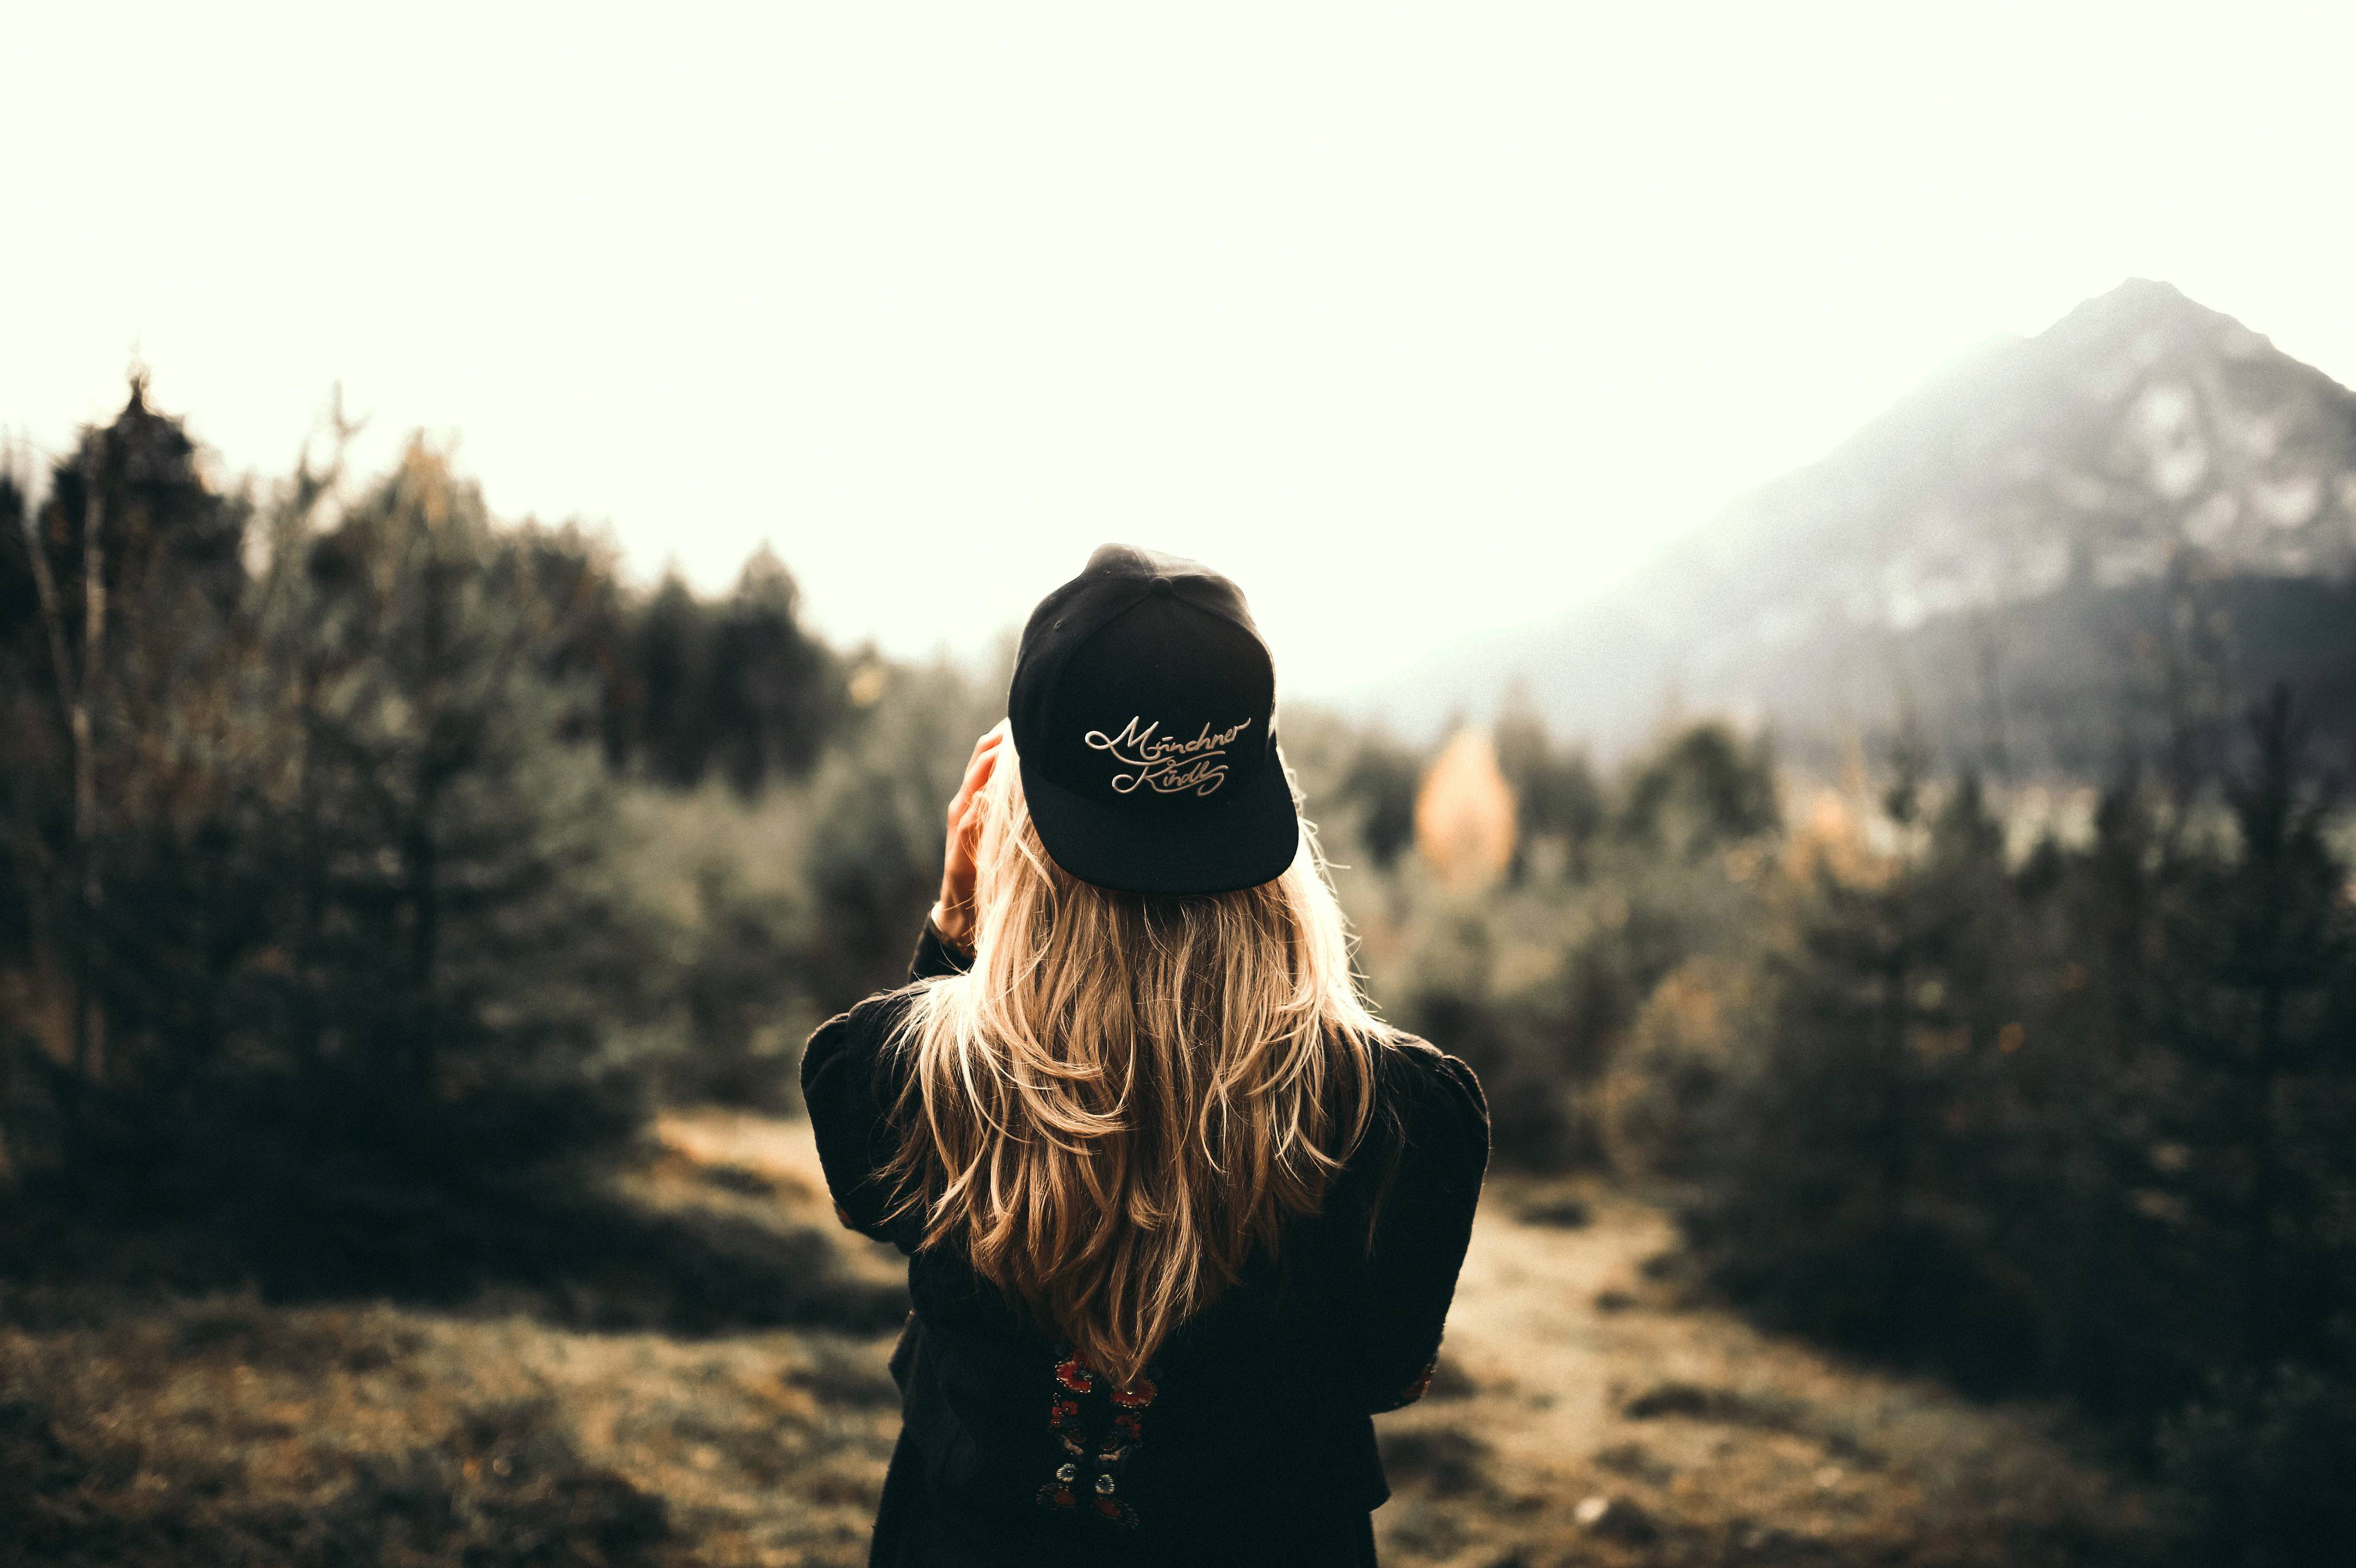 back girl wallpaper,people in nature,hair,photograph,sky,nature